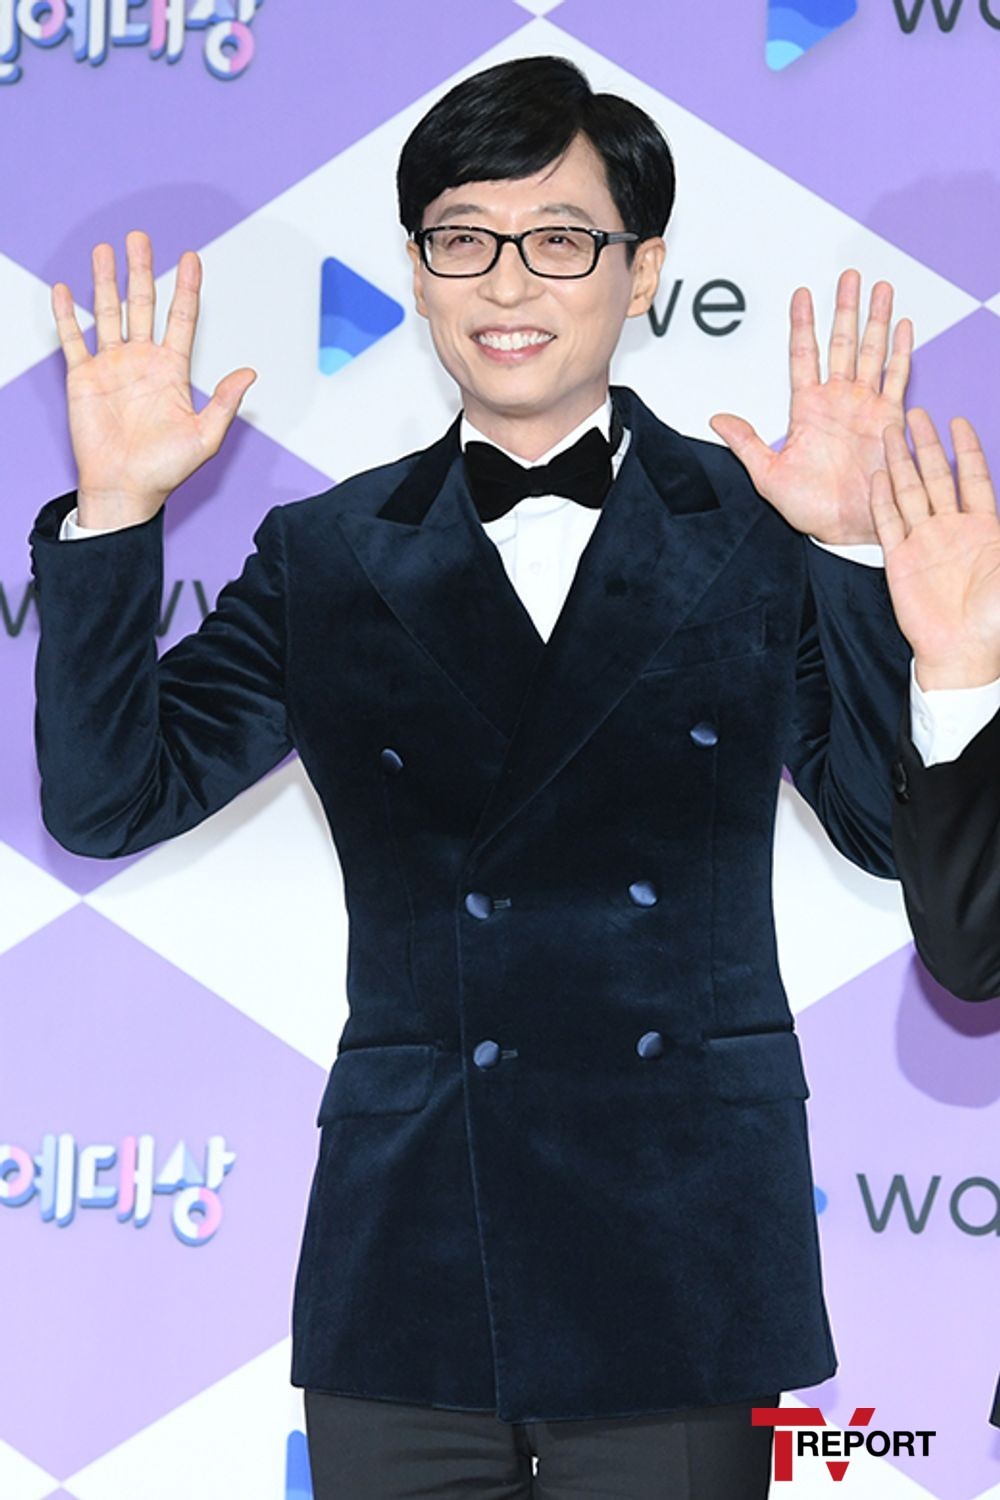 Yoo Jae-Suk of Running Man won the Grand Prize of 2019 SBS Entertainment Grand Prize.On the 28th, SBS 2019 SBS Entertainment Grand Prize was broadcast live, and Yoo Jae-Suk received the Grand Prize.Especially to Yoo Jae-Suk, Running Man won the 6th prize and was honored with the most prize.Running Man celebrated its ninth anniversary this year, with its 10th anniversary next year: Yoo Jae-Suk was honored with the award in four years following 2015.Yoo Jae-Suk was given a Grand Prize ahead of his 10th anniversary, making a new look.He said, I want to thank Jiho, Naeun, and my beloved Na Kyung-eun, he said. I really appreciate the production team.In particular, he said, I have been with the members for 10 years, and I have been in a lot of trouble for 10 years. I am very grateful for the sweating together and thank all the fans who save Running Man.Yoo Jae-Suk said: Its true that Variety is losing ground.Nevertheless, I would like to thank the crew and members who have been on the road together, and the guests who have been together, and it is true that we have homework to show what changes we will show next 10 years.I will tell you that I will do my best. Especially, Yoo Jae-Suk said, I think about Mr. Kuhara and Mr. Sully who left for heaven this year among our guests who appeared in Running Man.I hope you two will do what you want to do in the sky. Finally, Yoo Jae-Suk said, We think that our thoughts these days are ordinary and comfortable, and I am grateful for our daily life.I am grateful to our Haru, who has made this precious daily life, and to many people who have made a week and a year. A total of eight Grand Prize candidates were Yoo Jae-Suk, Baek Jong-won, Shin Dong-yeop, Kim Jong-kook, Gim Gu-ra, Seo Jang-hoon, Kim Byung-man and Lee Seung-gi.The strong Grand Prize candidates, Baek Jong-wons Alley Restaurant and Matnams Square, Baek Jong-won, received the Achievement Award.I think it means to work harder, he said, crediting the production crew and cast; last year Grand prize winner Lee Seung-gi won the Producer Award.In particular, Grand prize candidate Gim Gu-ra was excited by the statement that he would make three candidates and that he would make a mistake.SBS Entertainment Grand Prize was awarded evenly to major entertainment programs; stars who played in various entertainment shows this year were recognized for it.Kim Jong-kook of Ugly Our Little and Running Man won the Best Reality Show category.Kim Jong-kook, who said, If you do not get a Grand prize, I will go to burning youth. Kim Jong-kook laughed when he showed his intention to keep his promise.Also, Ugly Our Little Hong Jin-young won the Best Reality Show category; he drew attention with tears, saying, This year was so hard.The show and entertainment segment was won by Kim Seong-joo, an alley restaurant in Baek Jong-won, and Choi Sung-kuk, a burning youth.The best program award was awarded the Baek Jong-wons Alley Restaurant.Kim Hee-chul of Ugly Our Little and Masans Square received the Excellence Prize, and All The Butlers and Masans Square Yang Se-hyeong won the SBS Honorary Temple Award.As a result, Mamans Square was aired less than a month ago, but it won four gold medals to Baek Jong-won.In addition, All The Butlers won the Best Teamwork Award and  New members will be together from next year s New Year s Day, andThe new member was identified as Shin Seong-rok, which caught the eye.As proof of the SNS era, the SNS star award to the star who recorded high topic was newly given and attracted attention.Four people were honored to receive the award, including Sangmong 2 Gangnam District Lee Sang-hwa, Running Man Lee Kwang-soo, All The Butlers Integrated Yook Sungjae, Little Forest Park Na-rae.Rookie of the Year: Burning Youth Choi Min-yong, Baek Jong-wons Alley Restaurant Jung In-sunRadio DJ Award: Bae Seong-jaes Ten Bae Seong-jae, The Way to Home Soi HyunBest Couple: Ugly Our Little Boy Tak Jae-hoon & Lee Sang-minSBS Challenger: Jungles Law Huh Jae, Jungles Law Lee Tae-gon, Mattans Square Kim Dong-joonSBS Family Awards: Sangsangmong 2 Lee Yoon-jiSBS Honor Temple Award: All The Butlers Integrated and Mamans Square Yang Se-hyeongSBS Entertainer Award: Running Man HahaGlobal Program Awards: Running ManBest Teamwork Award: All The Butlers IntegratedSNS Star Award: Sangmyong 2 Gangnam District Lee Sang-hwa, Running Man Lee Kwang-soo, All The Butlers Integrated Yook Sungjae, Little Forest Park Na-raeBest Program Award: Sangmyongmong2. Burning YouthBest Program Award: Baek Jong-wons Alley RestaurantExcellence Prize: Ugly Our Little and Mattans Square Kim Hee-chul, Sangsangmong 2 Yoon Sang-hyun (Reality Show Division), Running Man Yang Se-chan, All The Butlers Integrated Lee Sang-yoon (Show and Variety Division)Best: Ugly Our Little and Running Man Kim Jong-kook, Ugly Our Little Hong Jin-young (Reality Show Division), Baek Jong-wons Alley Restaurant Kim Seong-joo, Burning Youth Choi Sung-kuk (Show and Variety Division)Producer Award: All The Butlers Integrated and Little Forest Lee Seung-giAchievement Award: Baek Jong-wons Alley Restaurant and Mattans Square Baek Jong-wonGrand prize: Running Man Yoo Jae-Suk